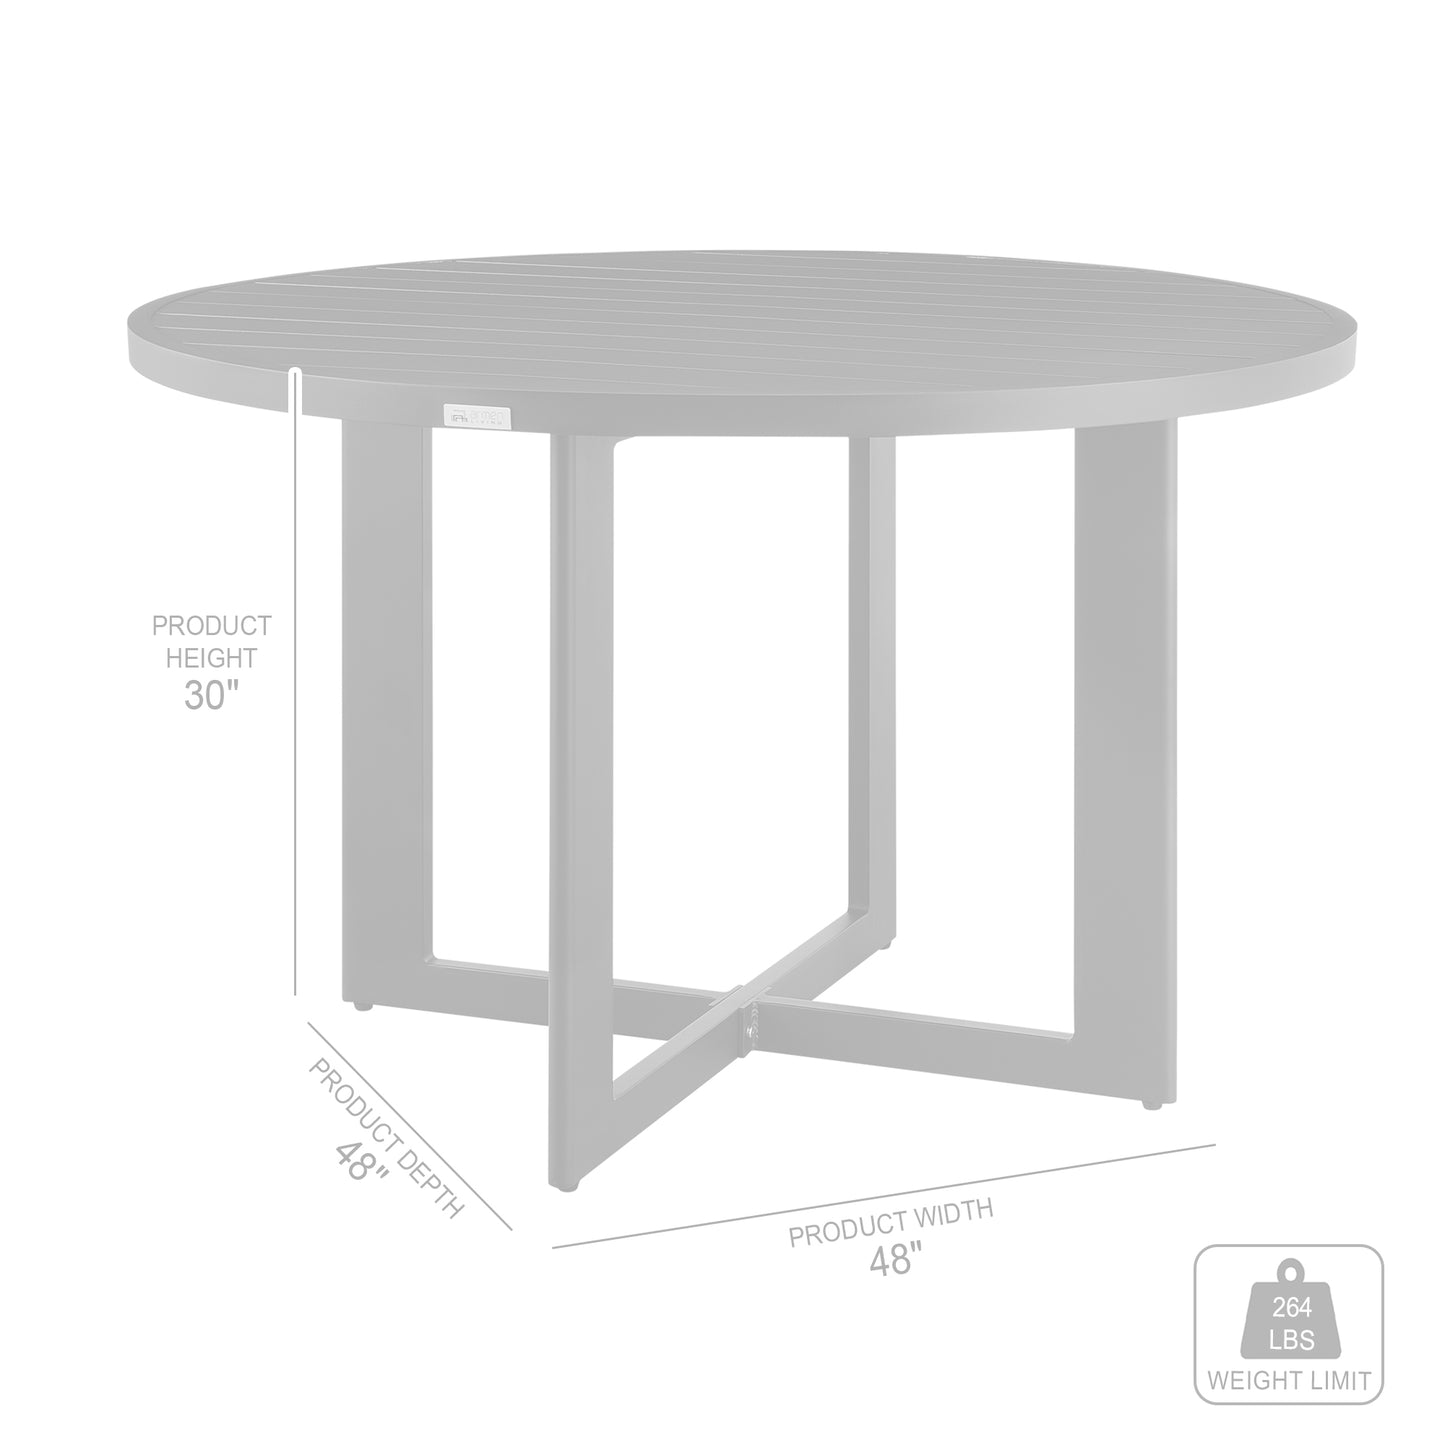 Cayman Outdoor Patio 5-Piece Round Dining Table Set in Aluminum with Gray Cushions